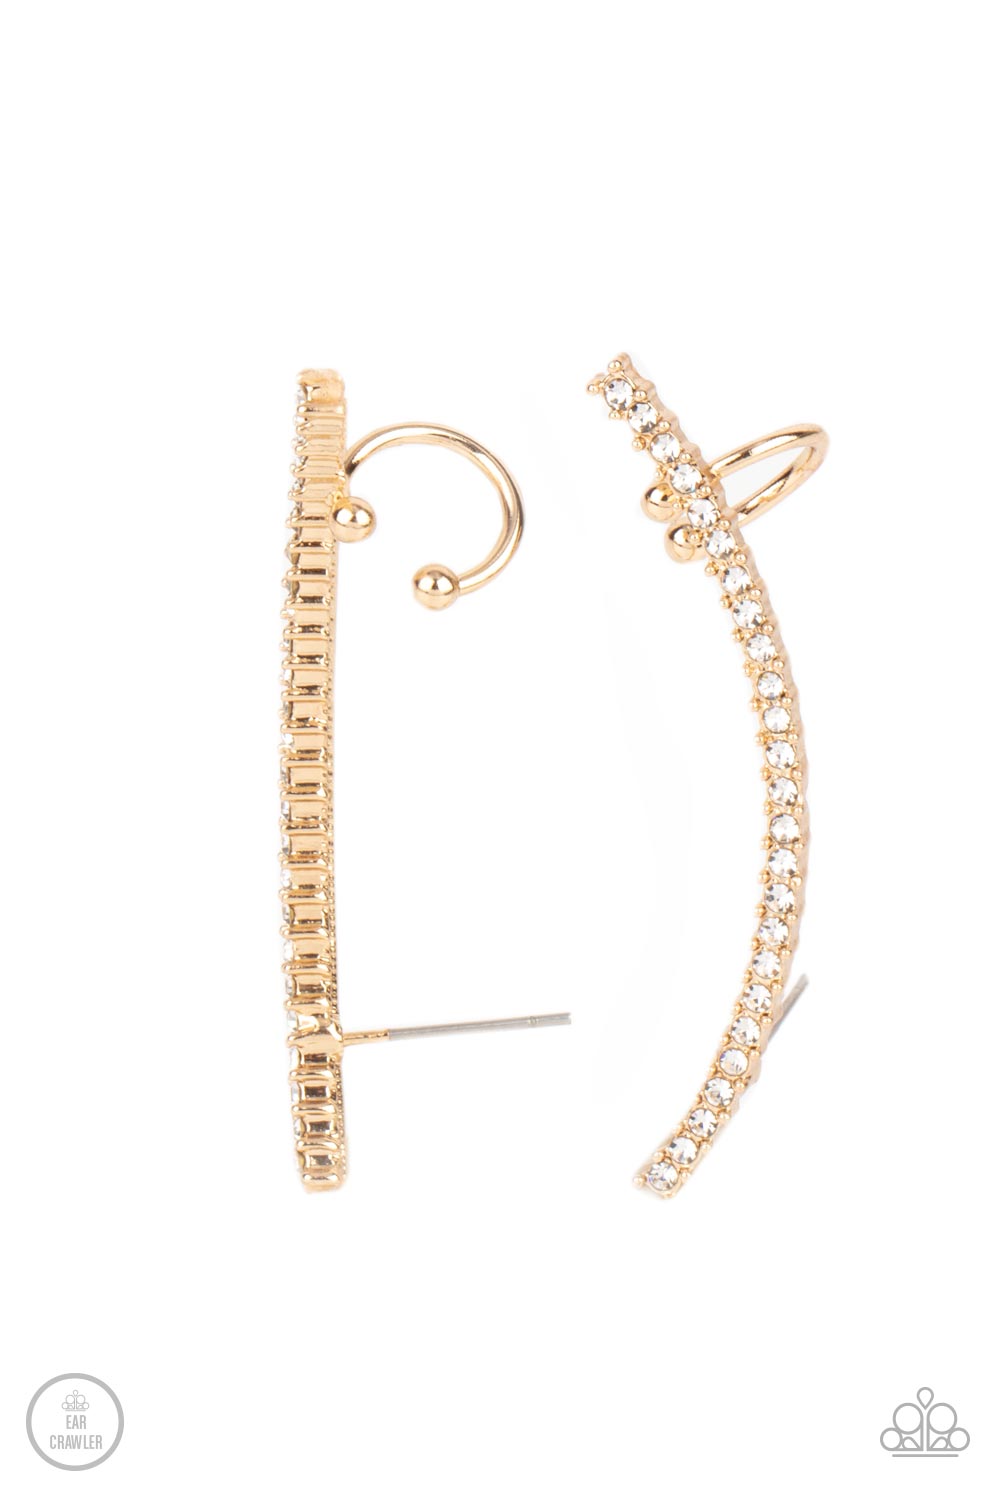 Sleekly Shimmering Gold Ear Crawler Earring - Paparazzi Accessories  Featuring pronged gold fittings, a dainty row of stacked white rhinestones gently curves as it climbs the ear for a flawless fashion. Features a dainty cuff attached to the top for a secure fit.  Sold as one pair of ear crawlers.